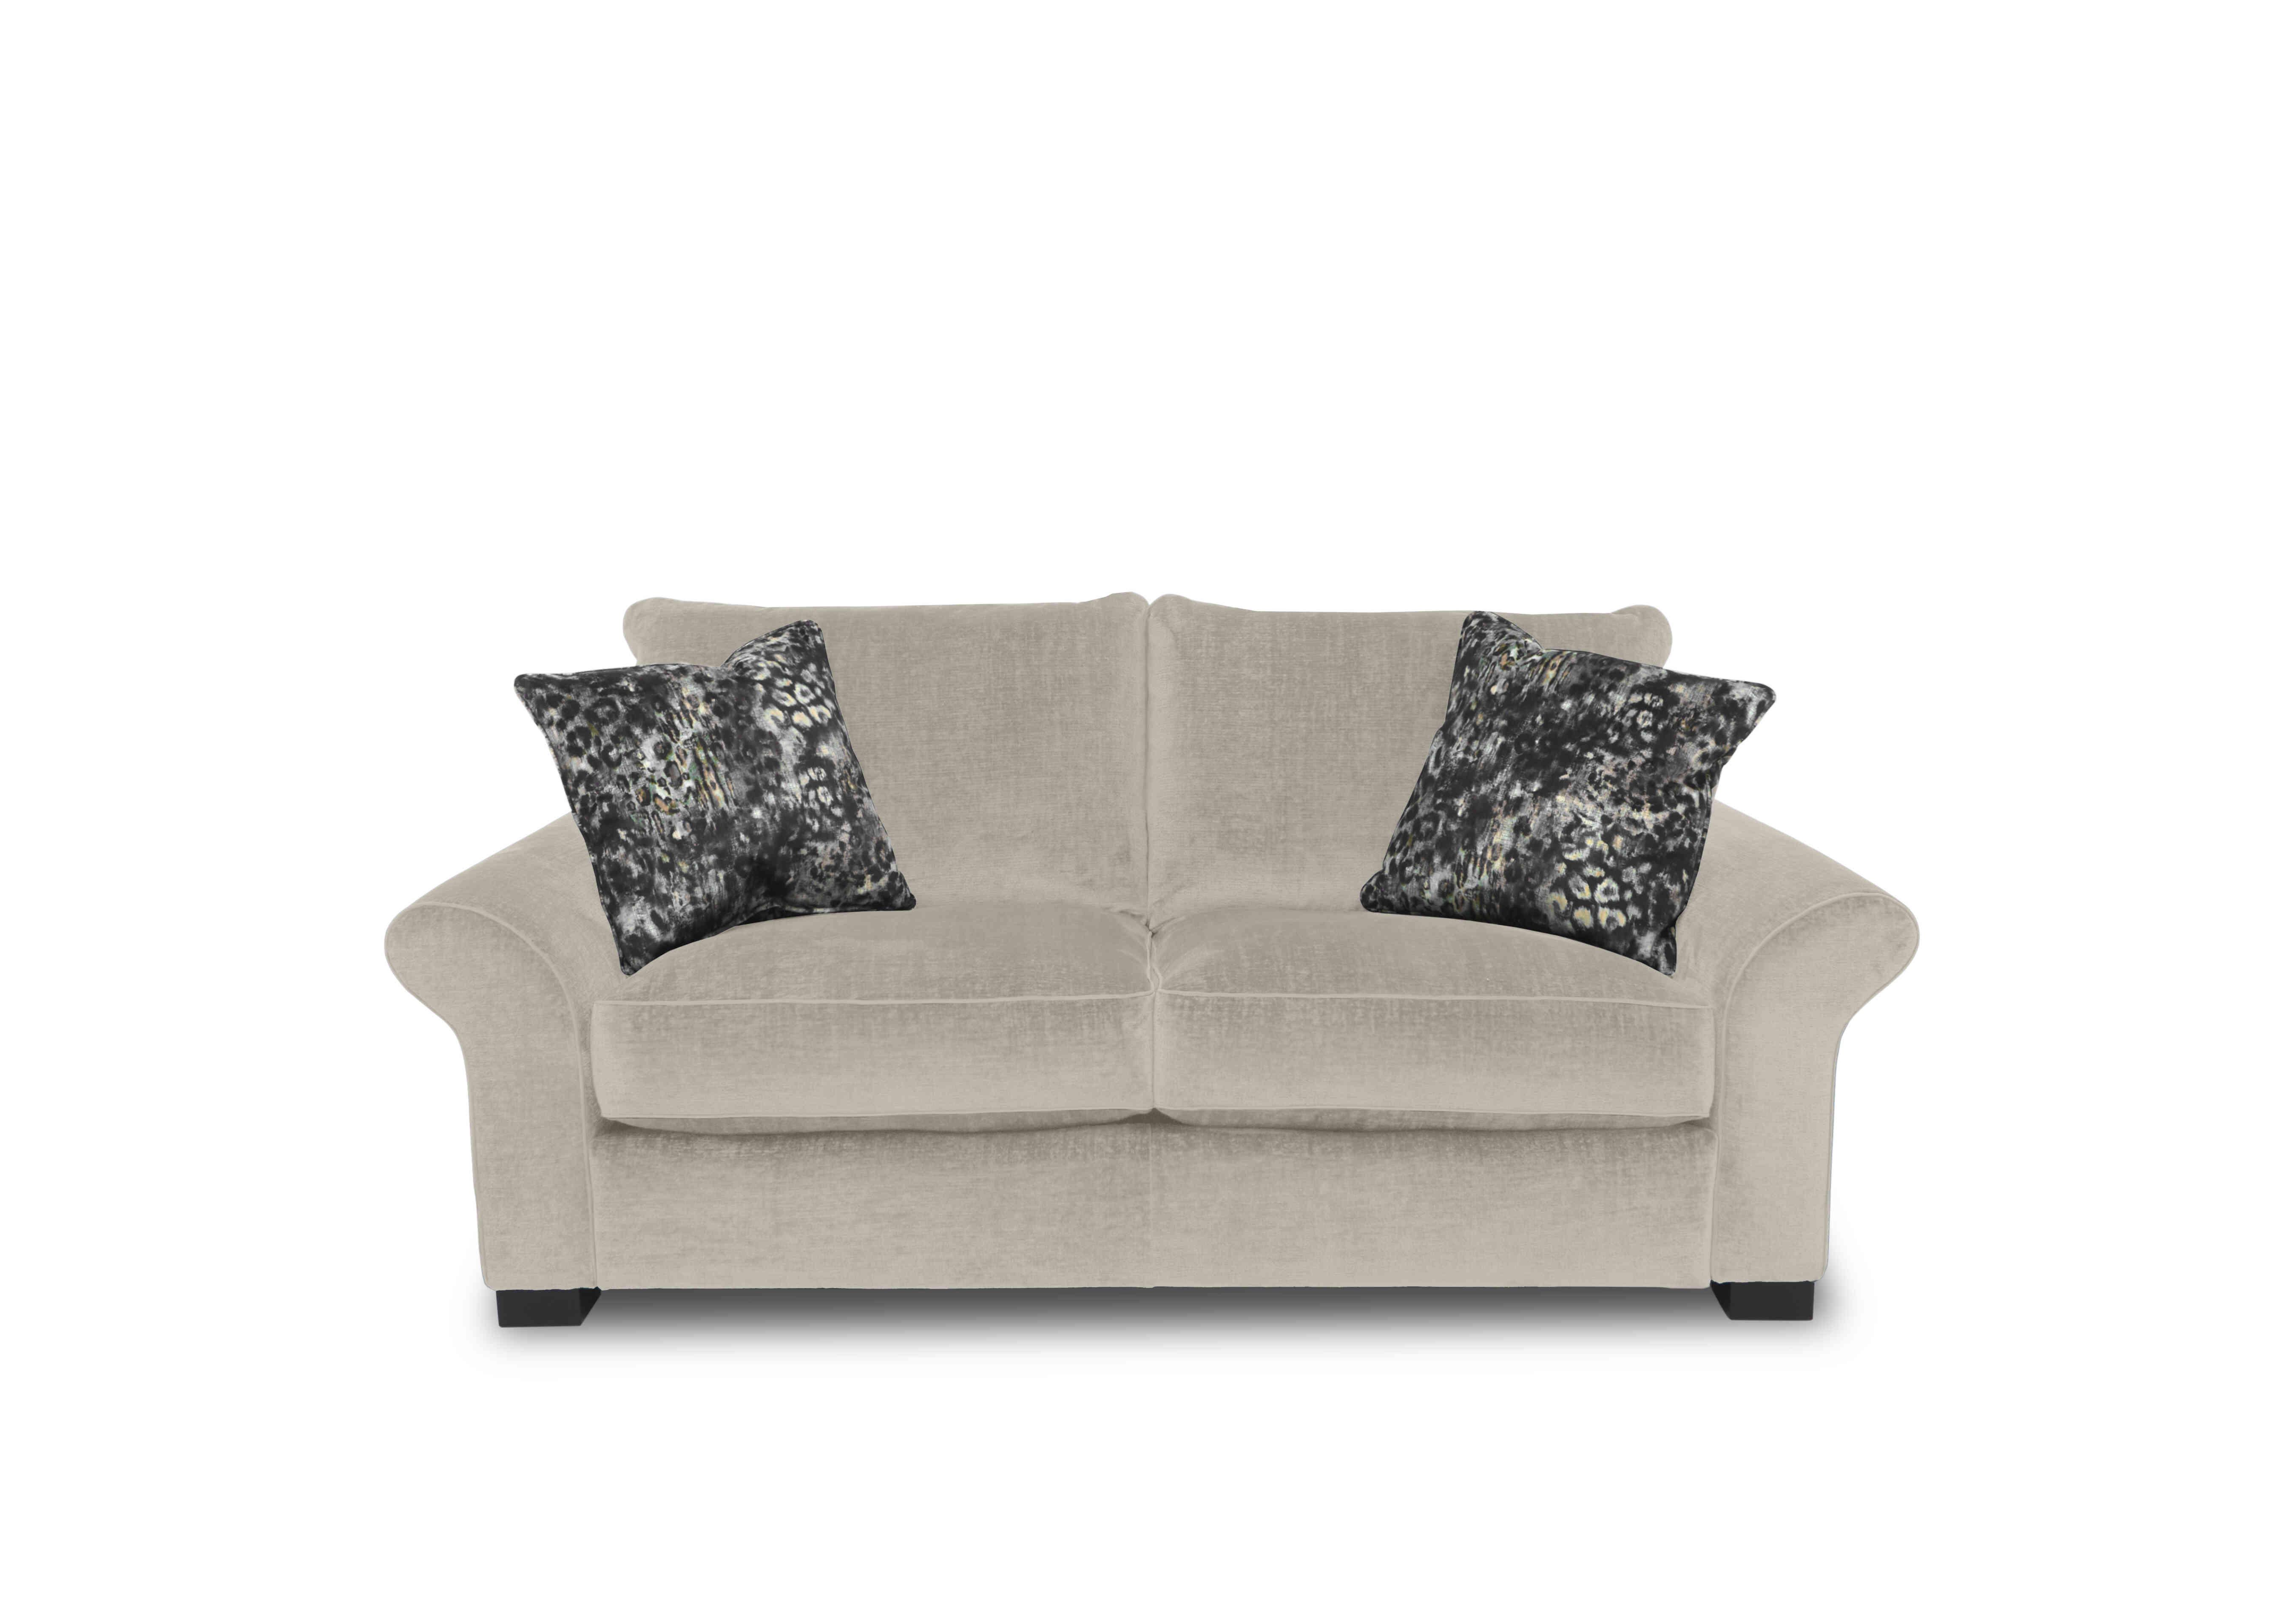 Modern Classics Hyde Park 2 Seater Sofa in Remini Oyster Sp Mf on Furniture Village